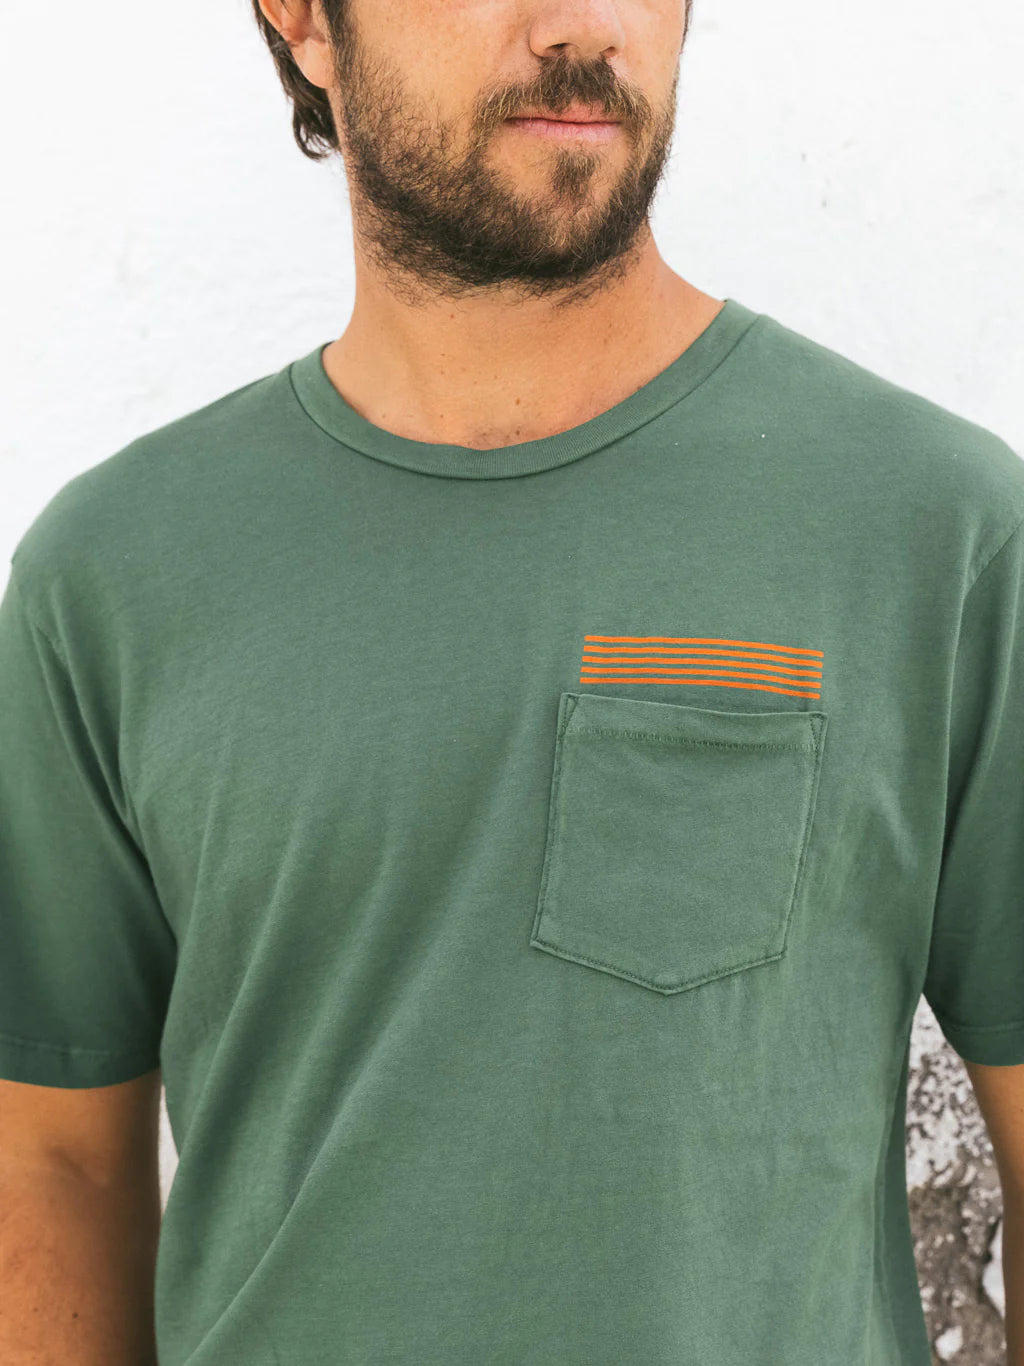 Front view of men's green short sleeve pocket t-shirt with small orange lines above the pocket